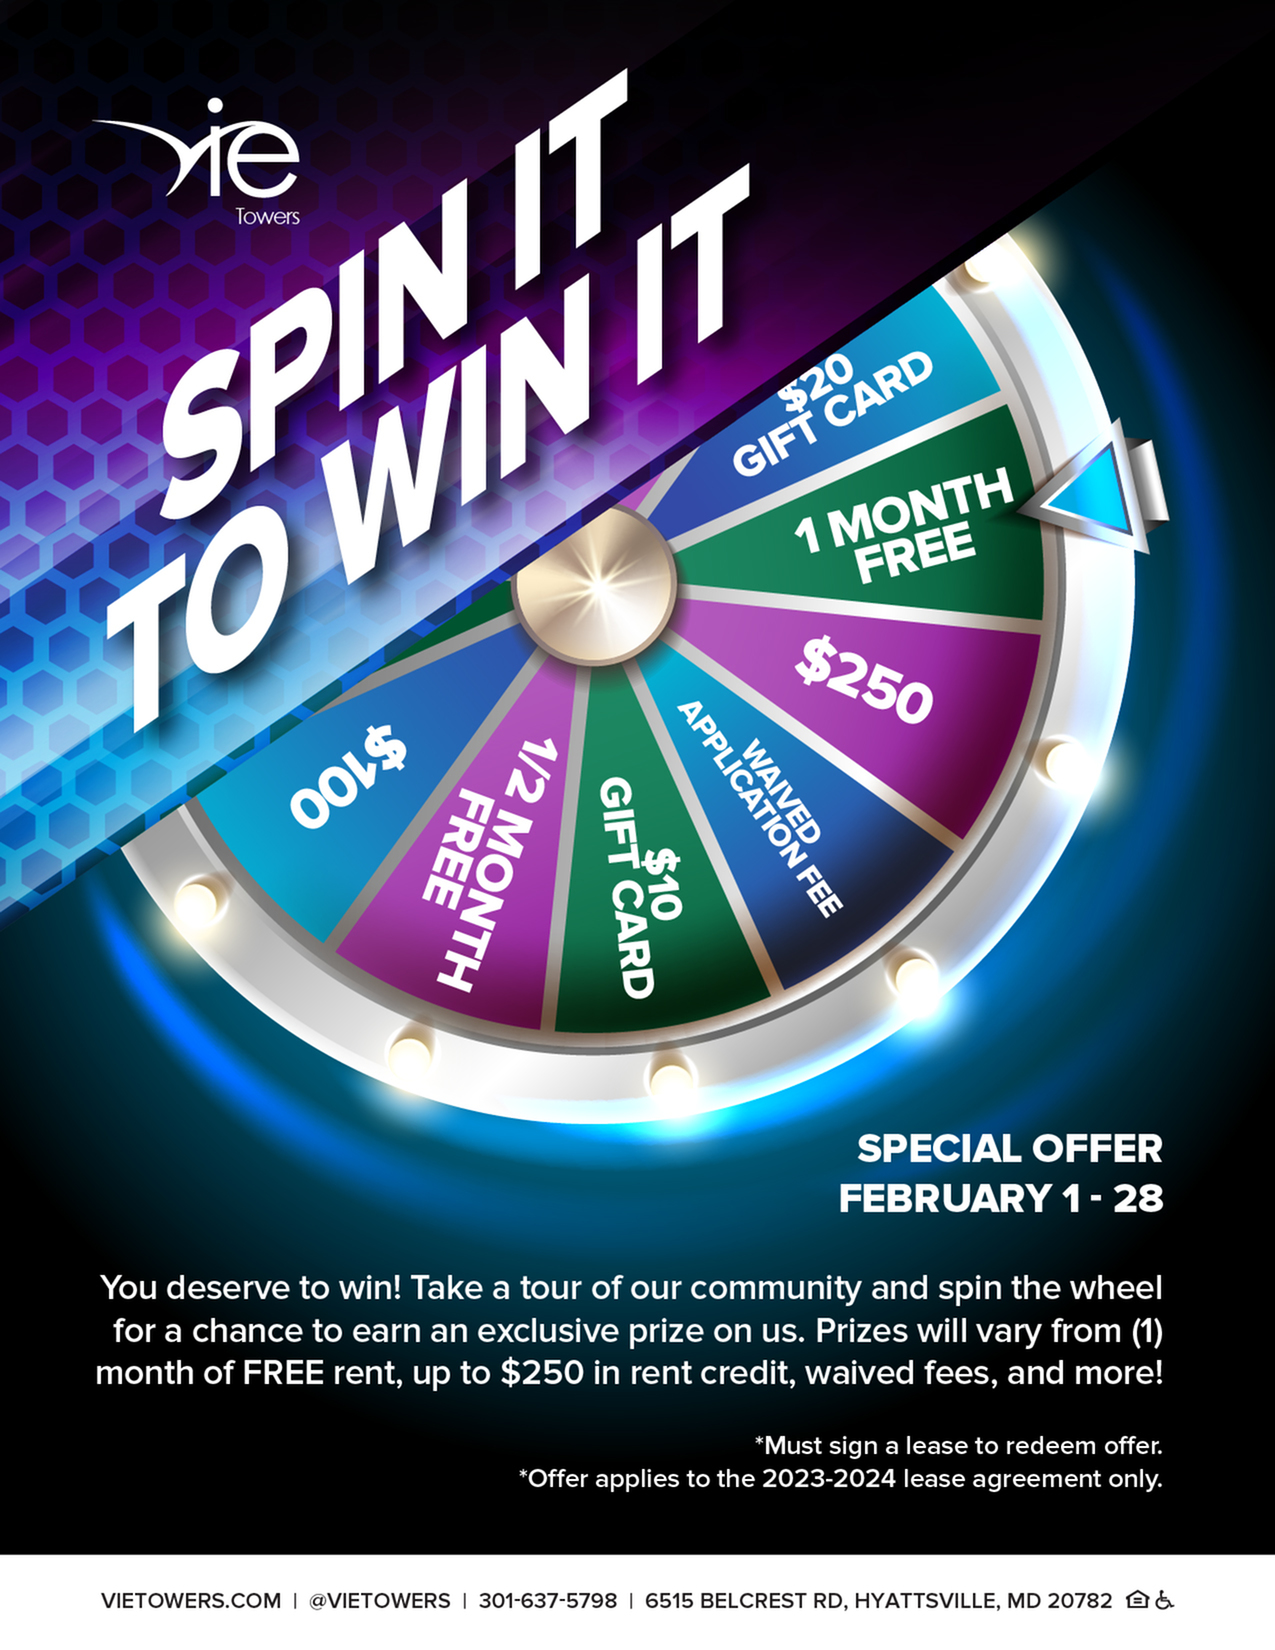 Special Offer: Spin It to Win It-image